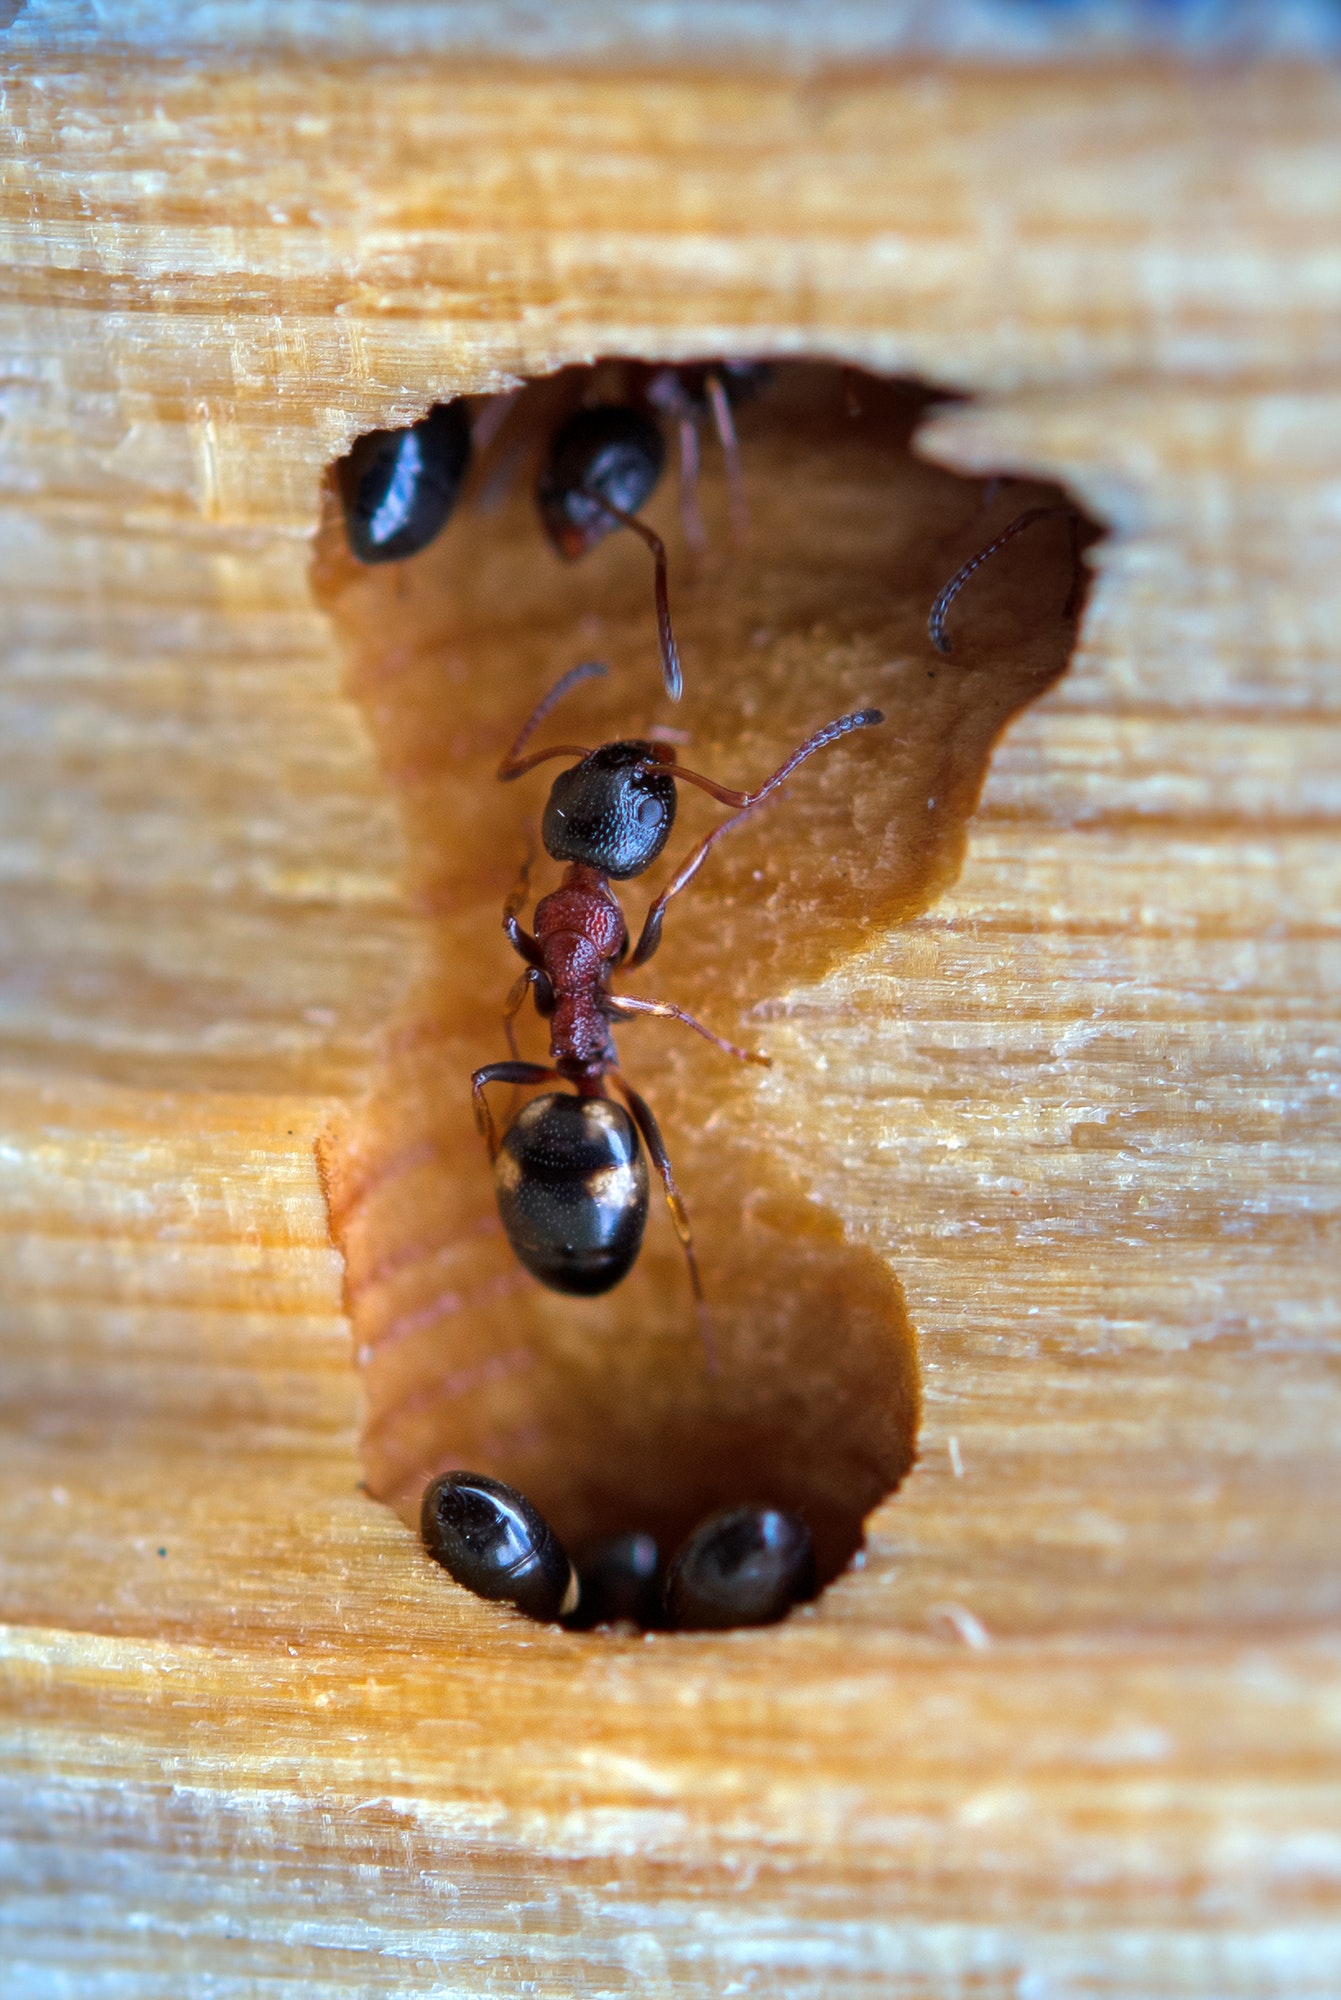 ant in an anthill